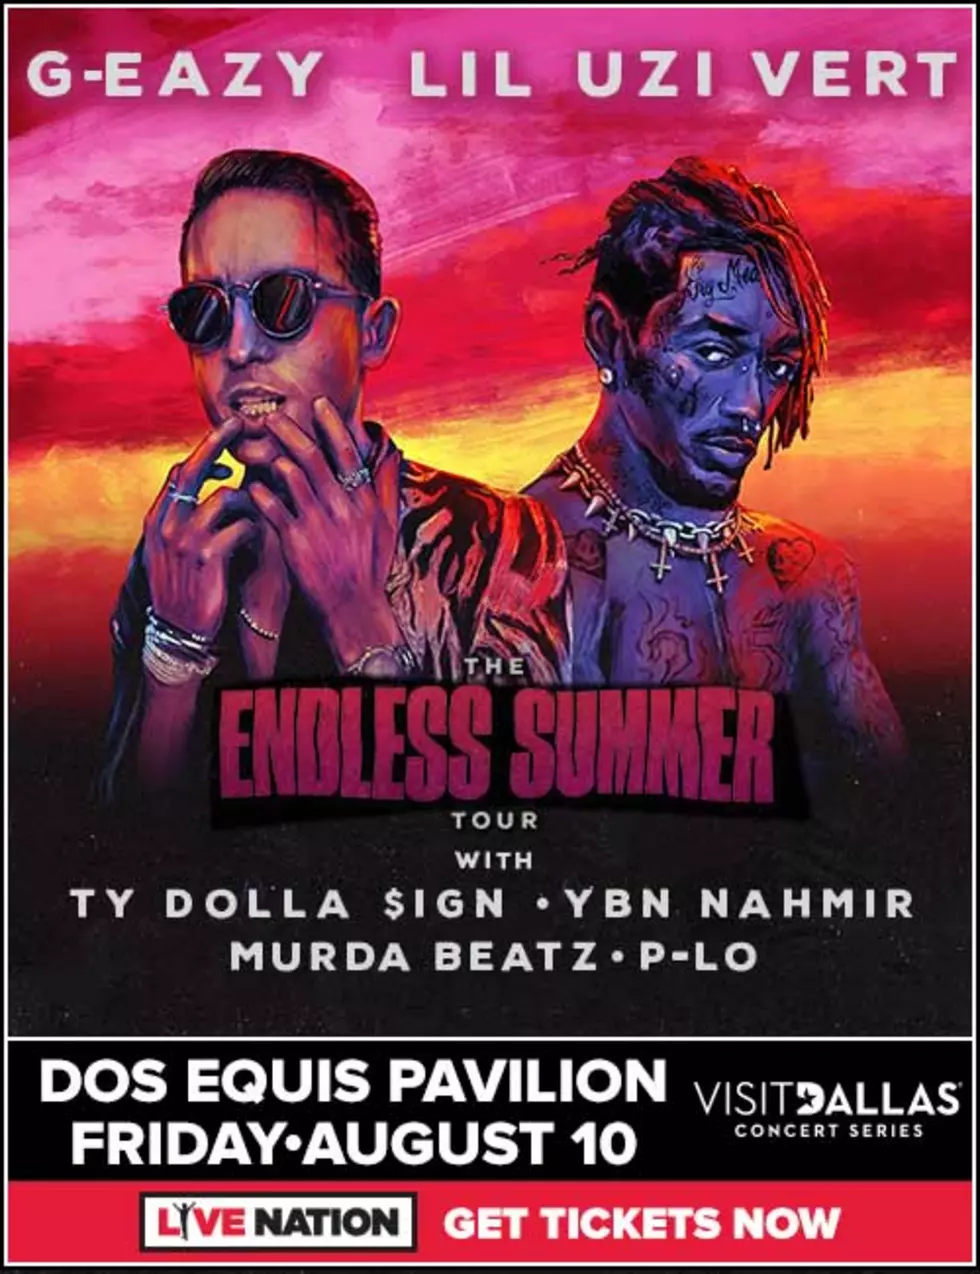 We got tickets to the G-Eazy, Lil Uzi Vert show in Dallas Friday August 10th!